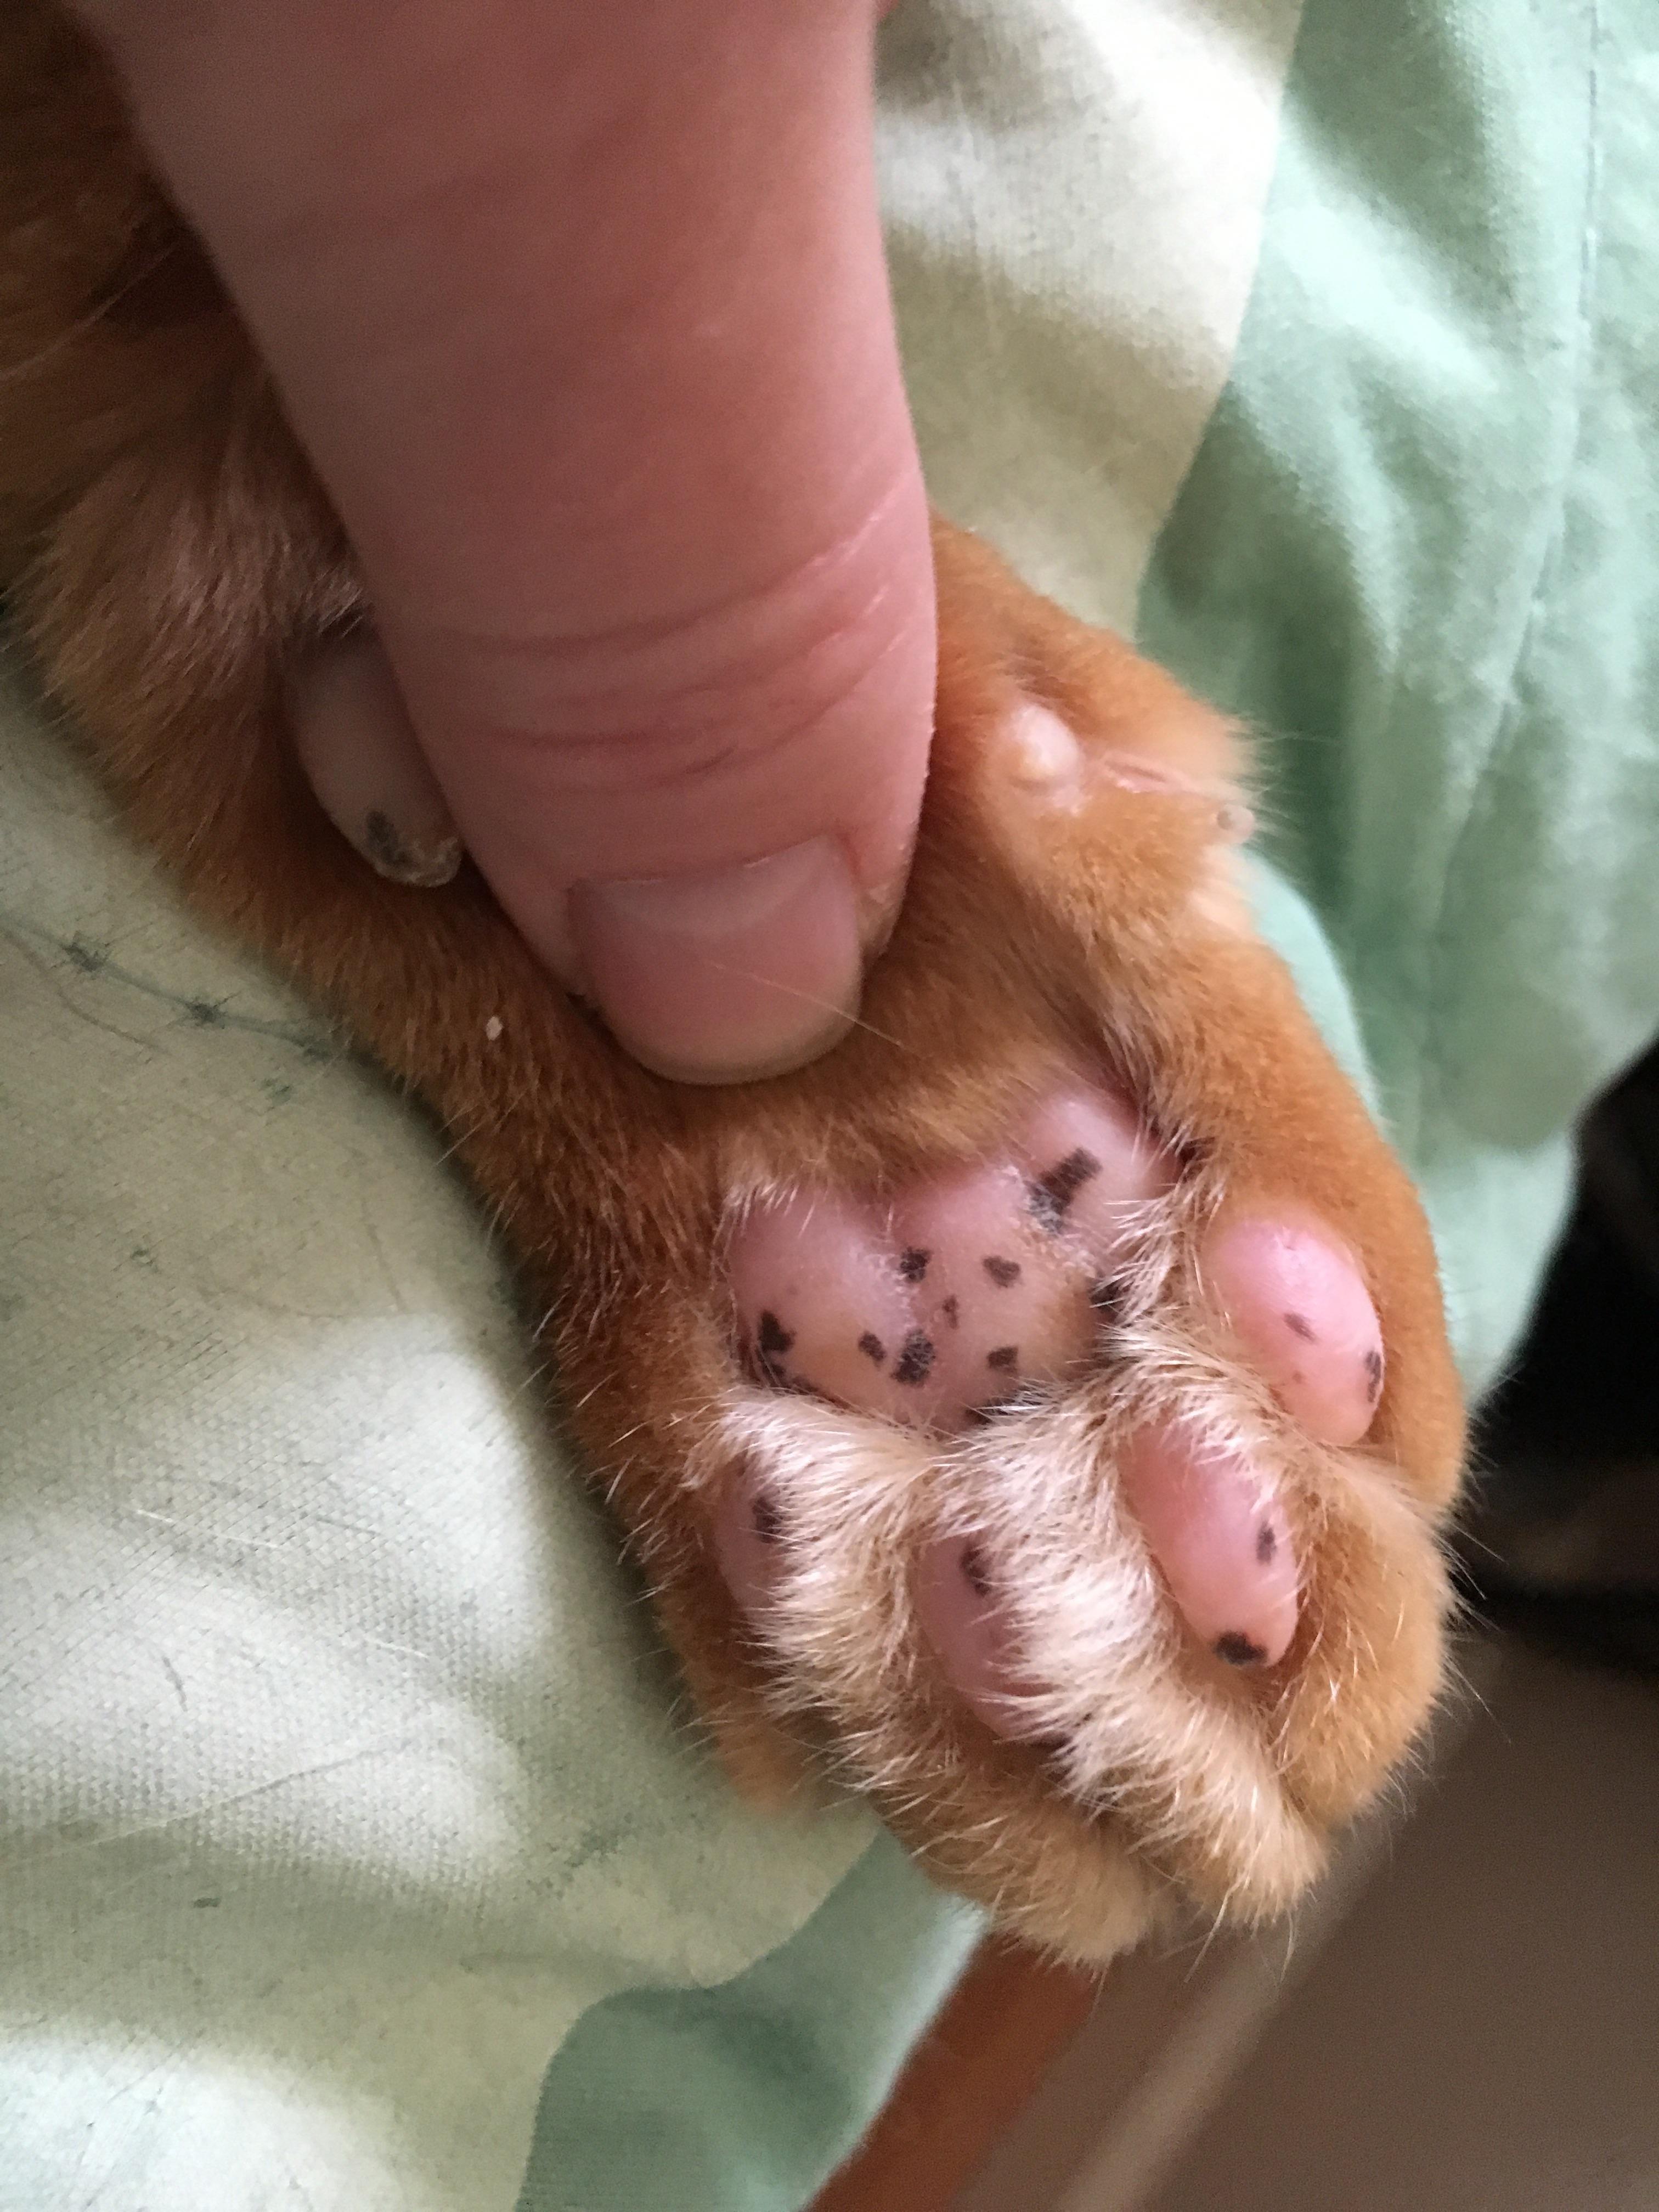 My kijje has freckles on his push beans.